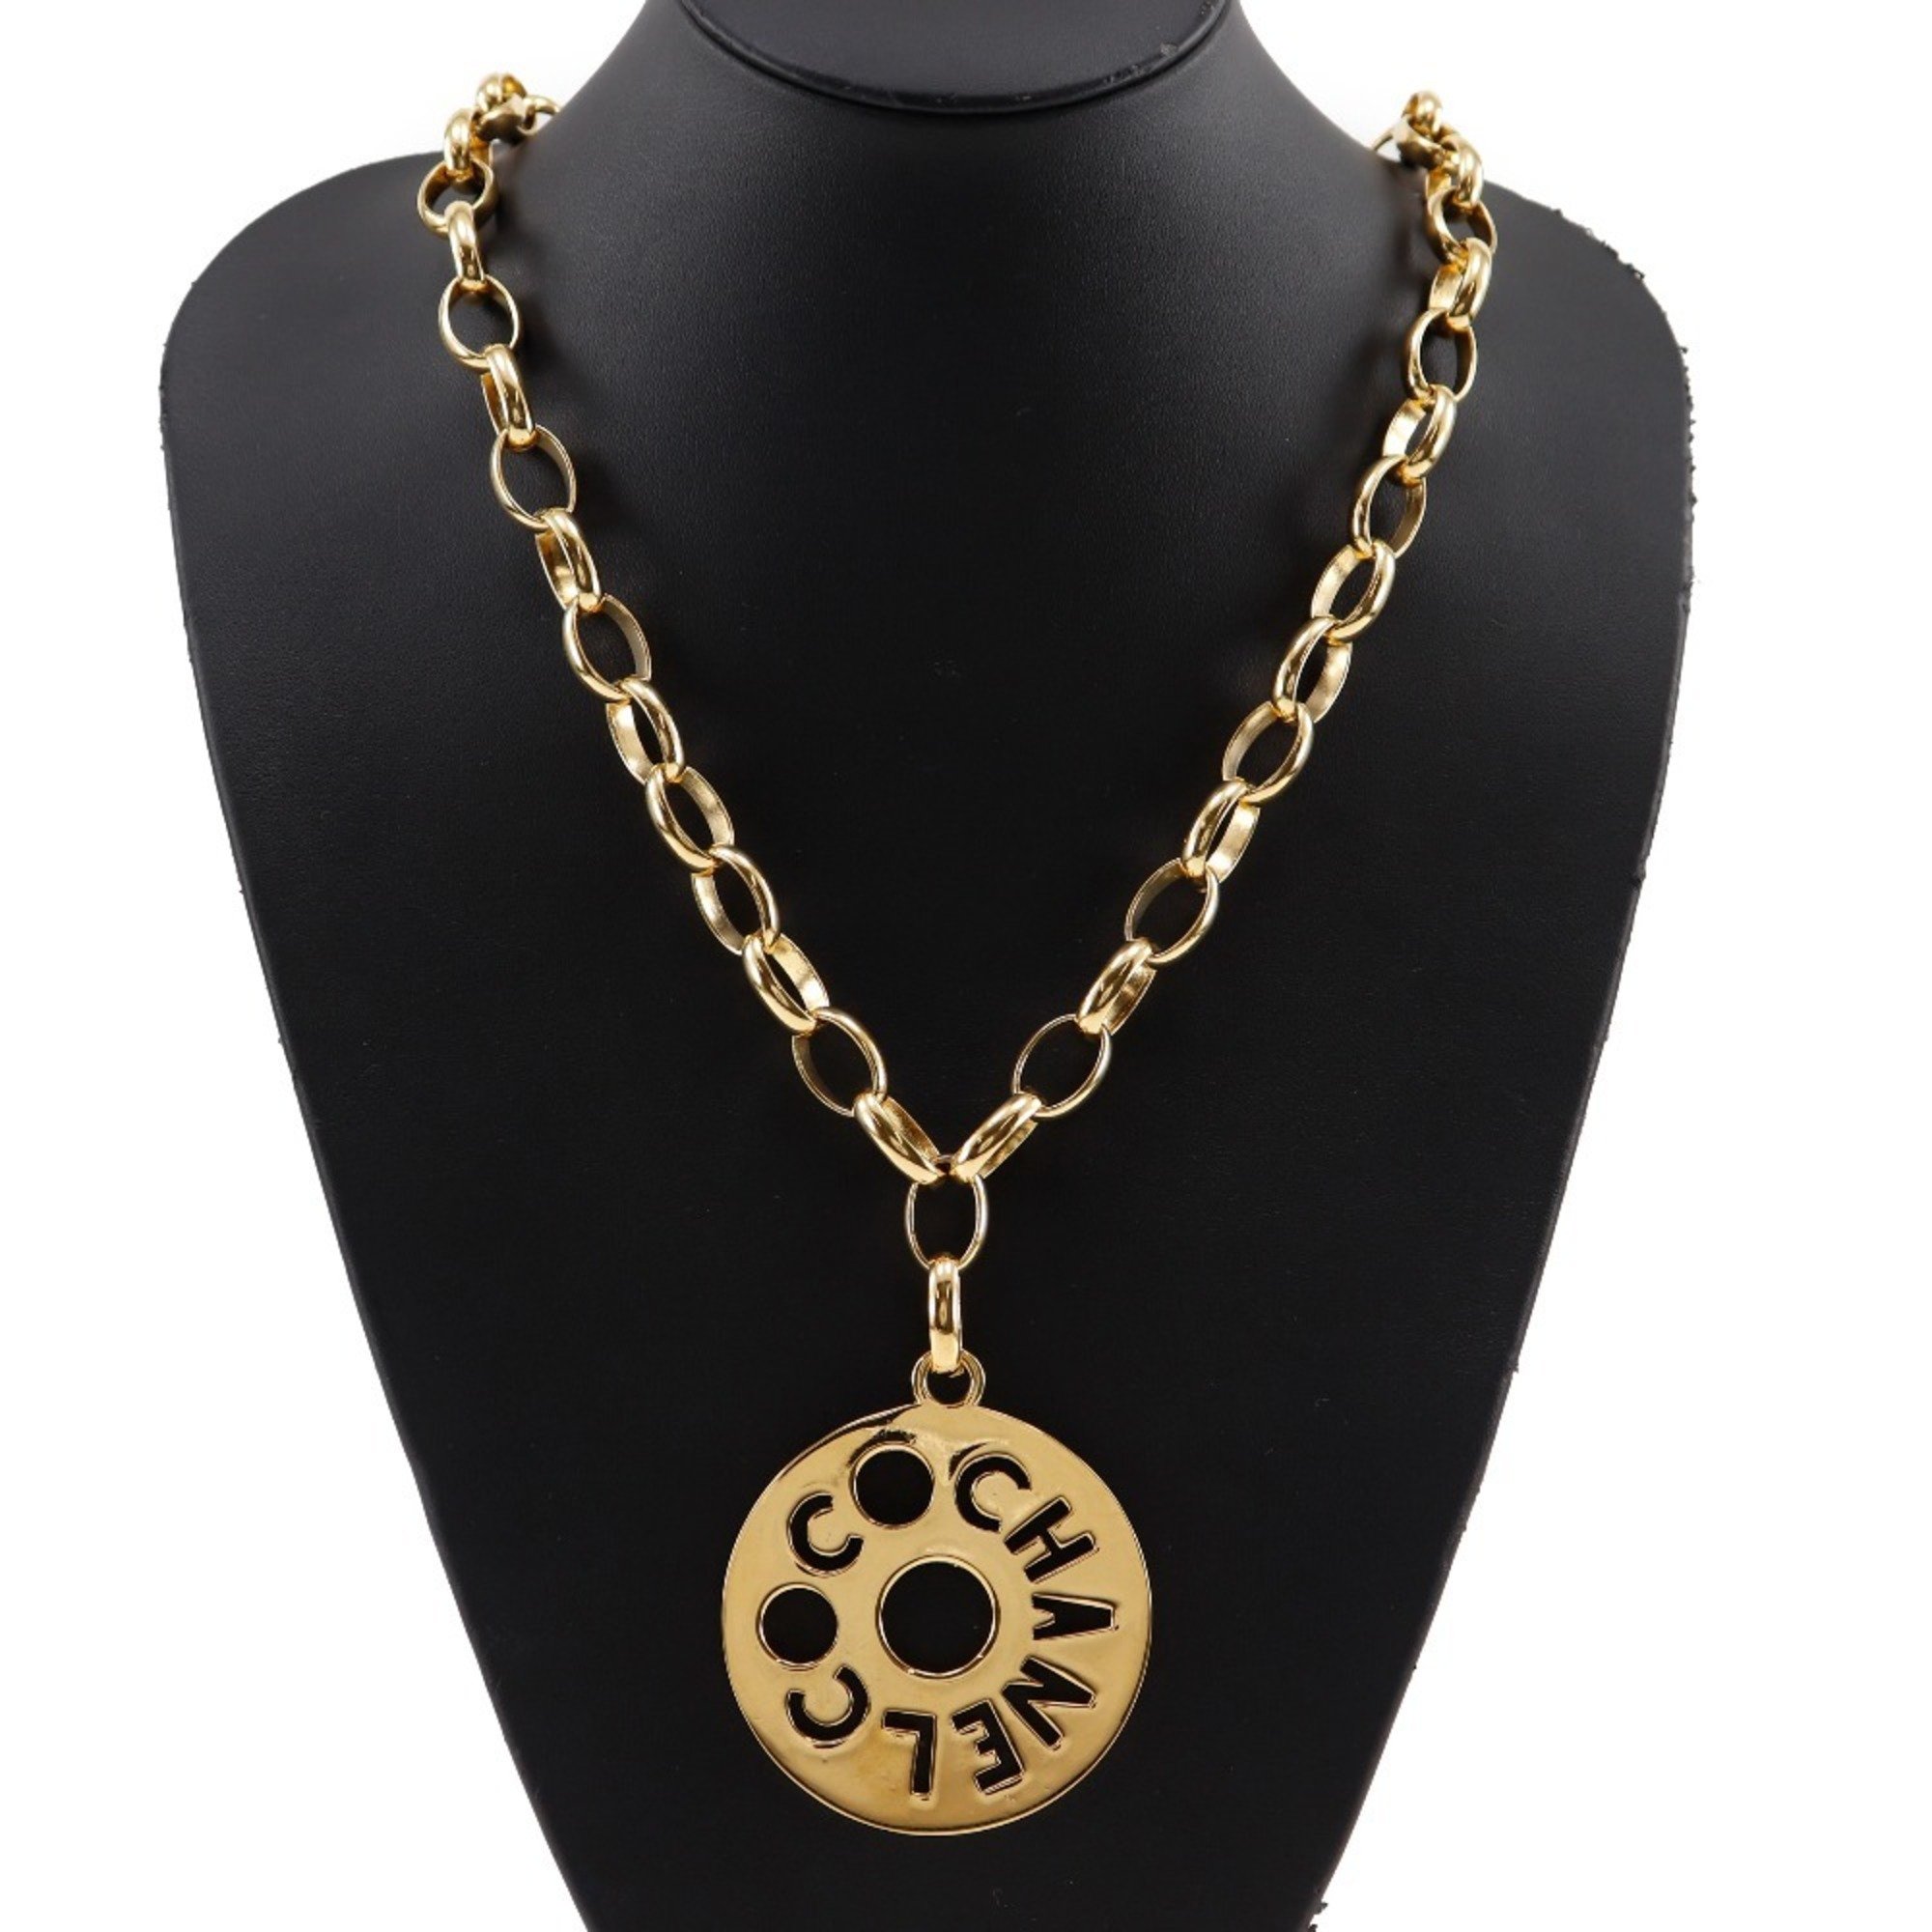 Chanel CHANEL Necklace Gold Plated Approx. 167.0g Women's